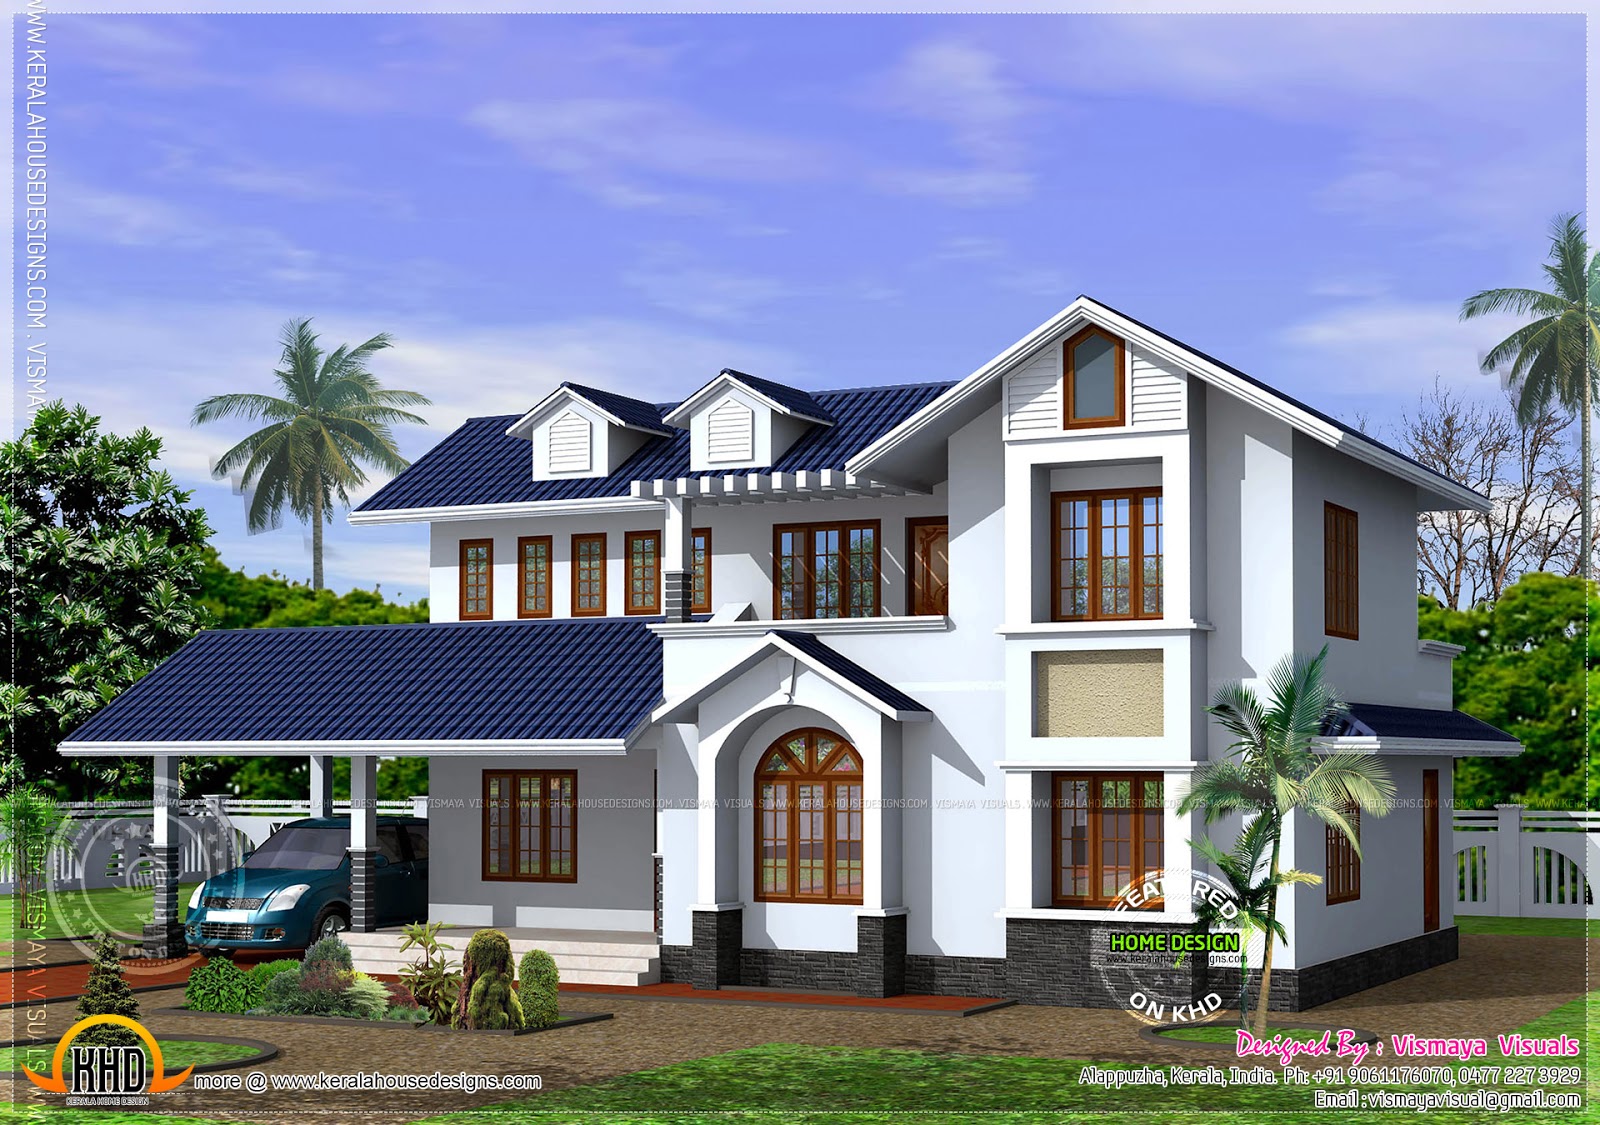  Kerala  style  house  with free  floor plan  Home  Kerala  Plans 